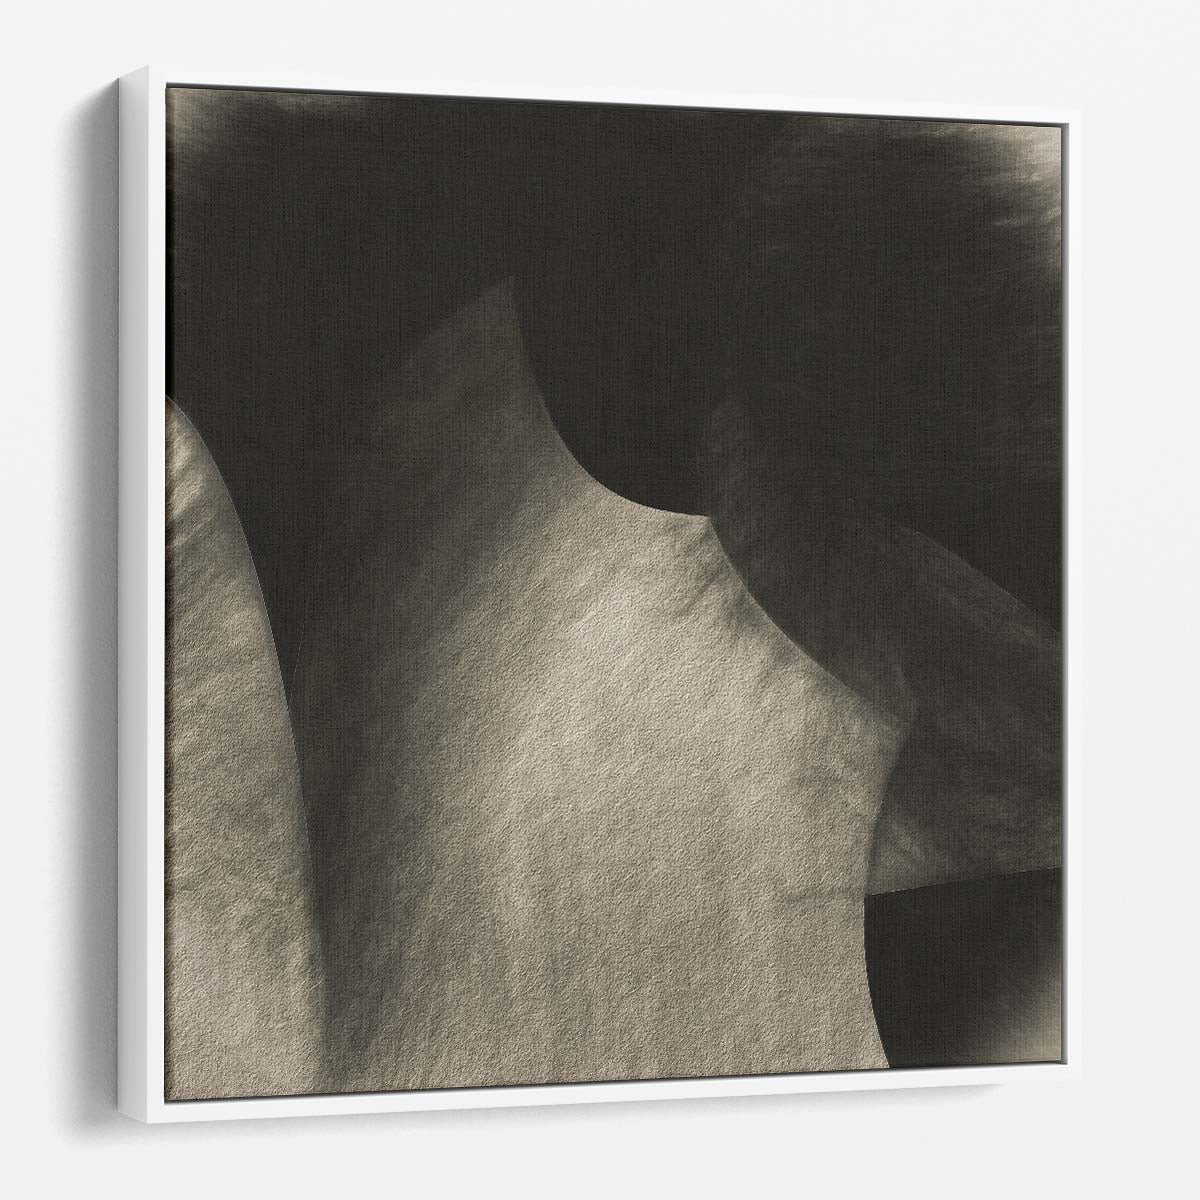 Abstract Black Ink Rock Artistry Photography Wall Art by Luxuriance Designs. Made in USA.